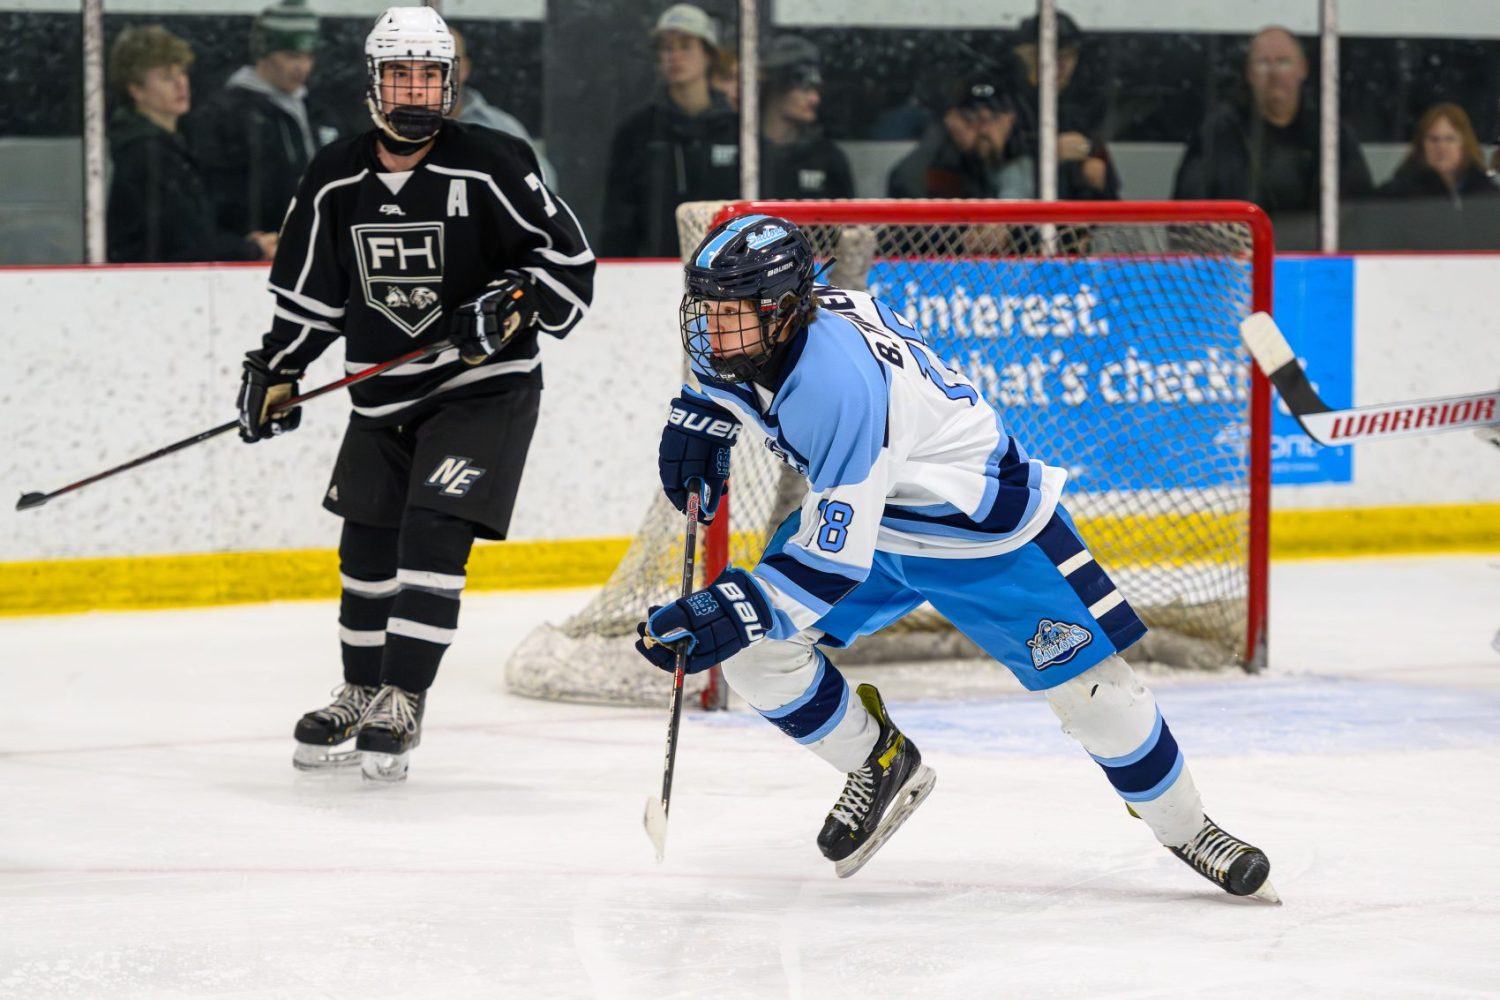 Conrad, Nellis bag first varsity goals in Mona Shores’ league hockey victory over Forest Hills